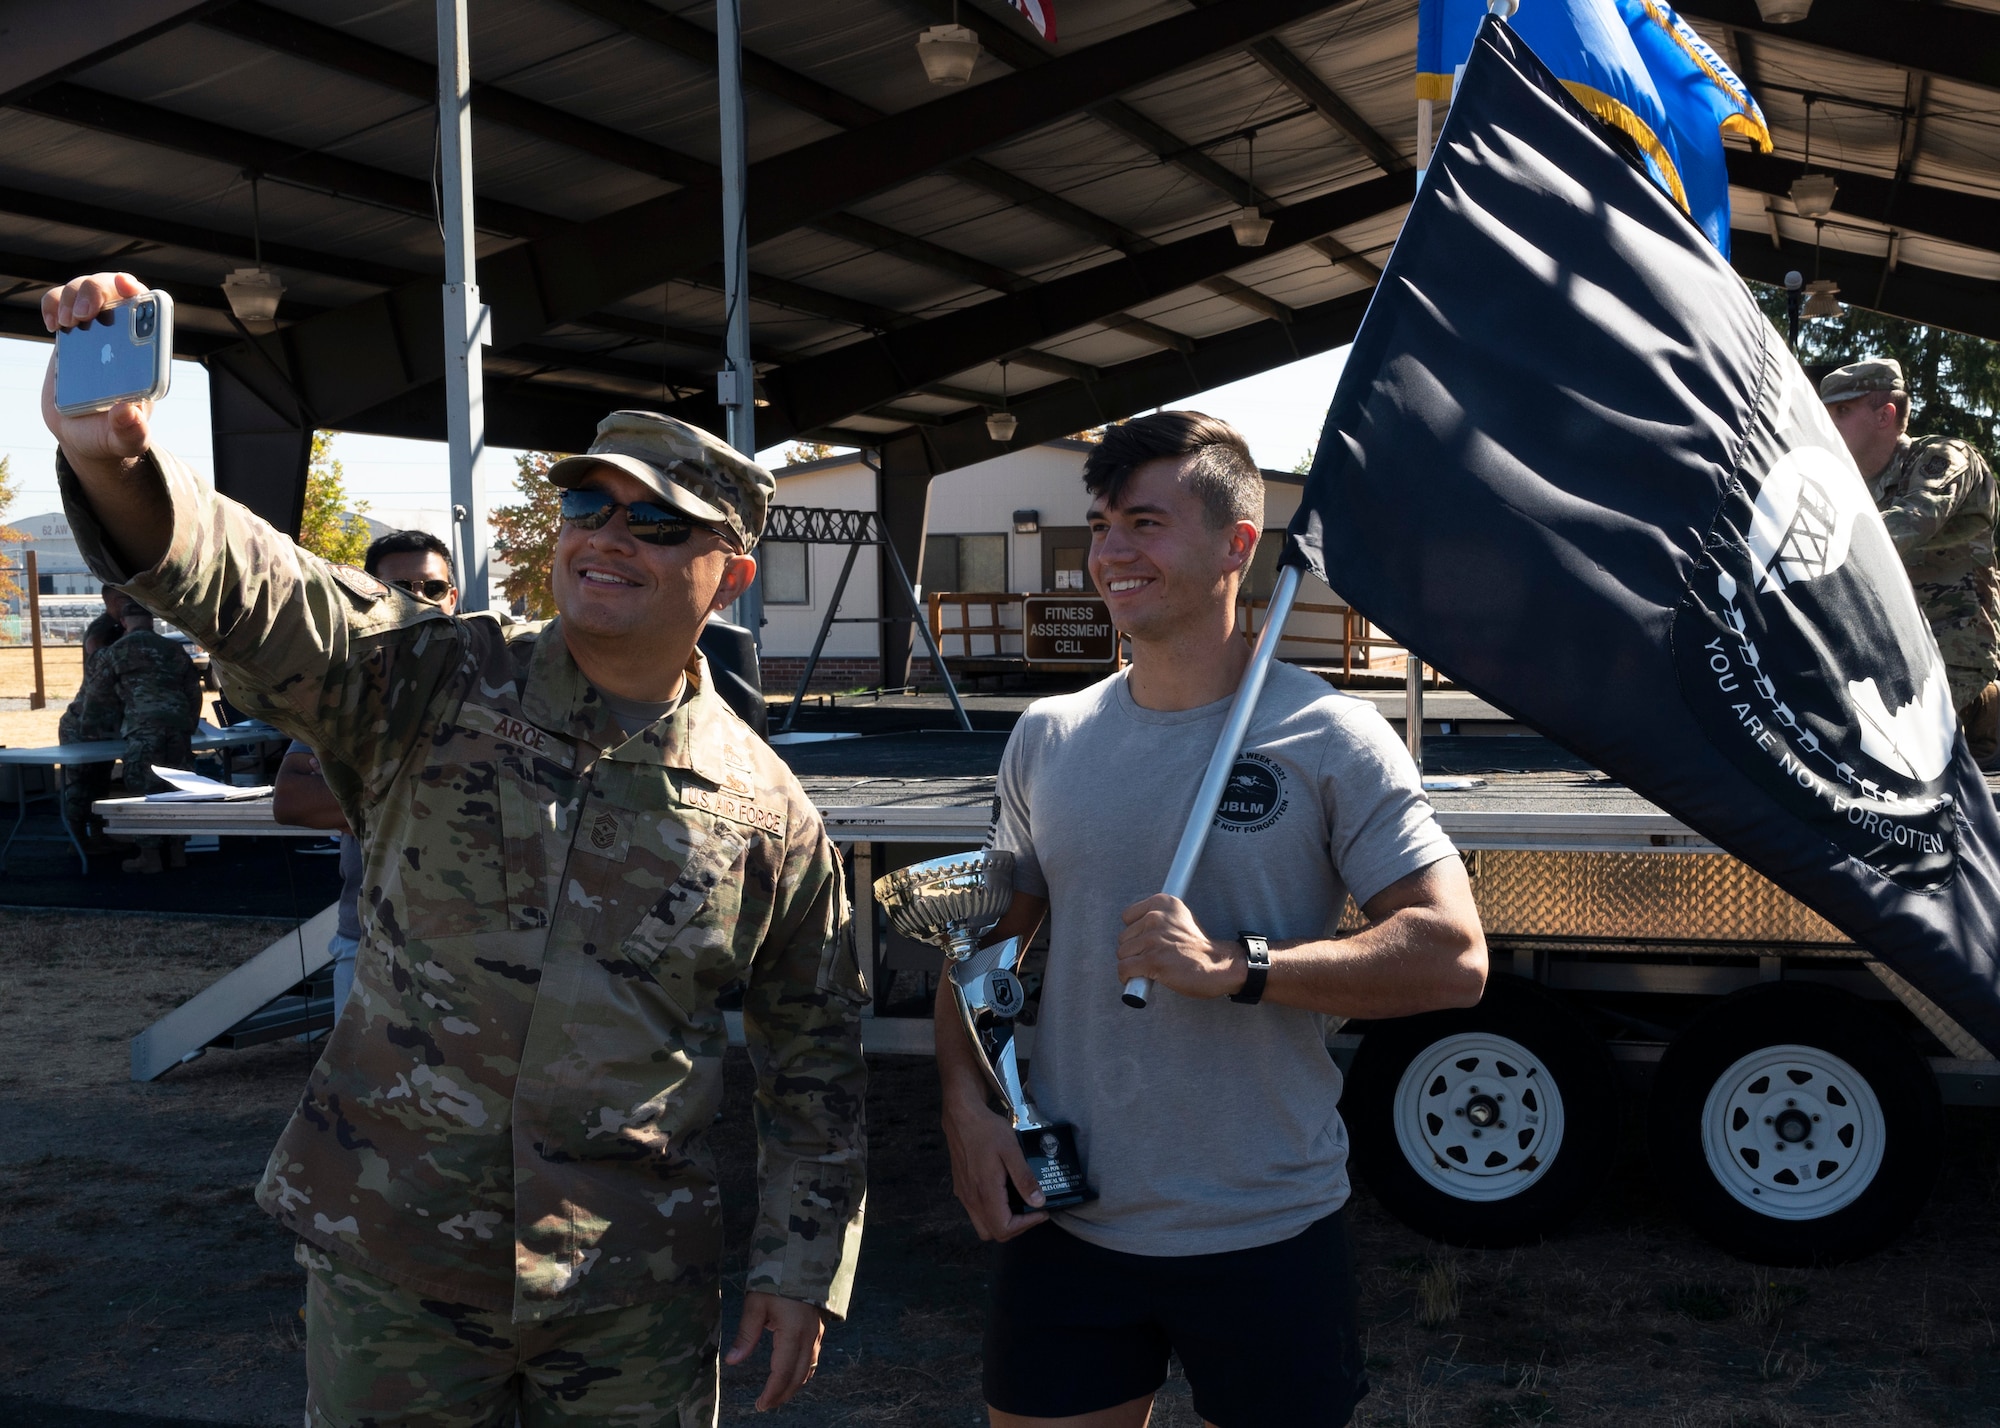 U.S. Air Force Chief Master Sgt. Joseph Arce, 62nd Airlift Wing command chief, takes a photo with Senior Airman Patrick Christofferson, an aerospace ground equipment Airman with the 62nd Maintenance Squadron, after receiving the award for most miles ran by a single individual during the 24-hour POW/MIA Remembrance Run at Joint Base Lewis-McChord, Washington, Sept. 16, 2021. Christofferson ran 26.6 miles in total; paying his respects to the memory of those Americans who were prisoners of war or were, and may still be, missing in action. (U.S. Air Force photo by Senior Airman Zoe Thacker)